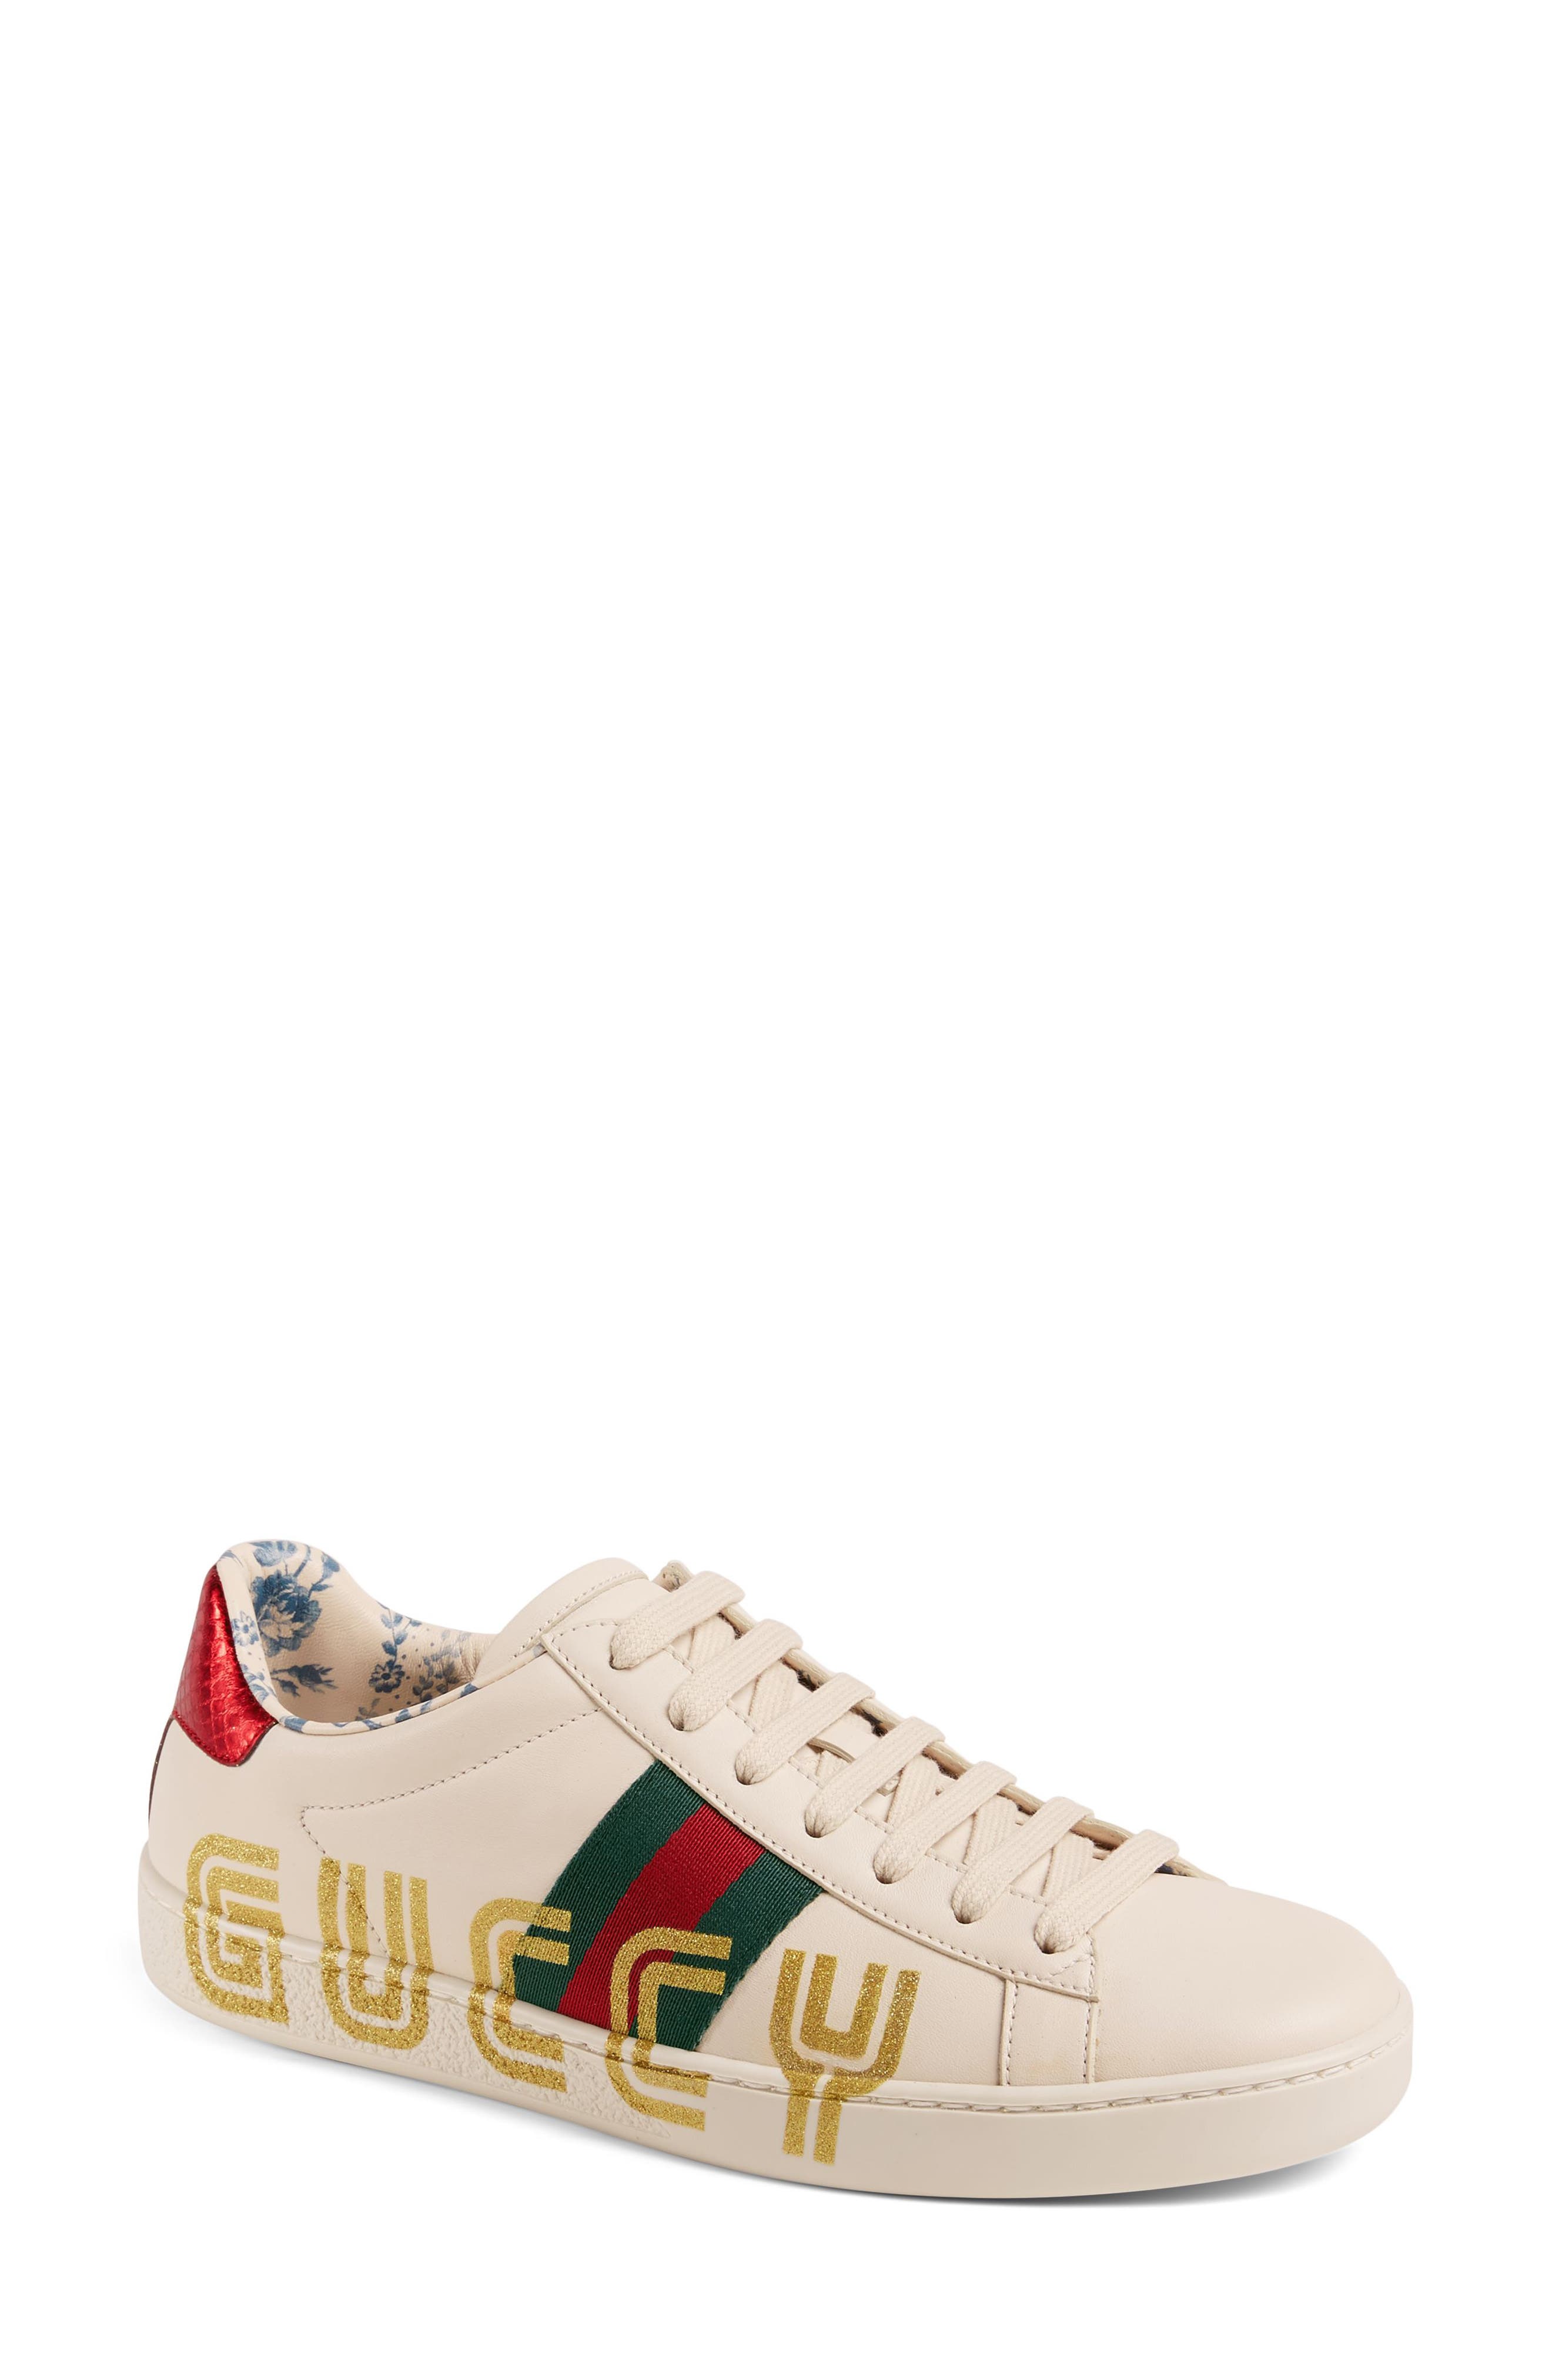 gucci guccy sneakers